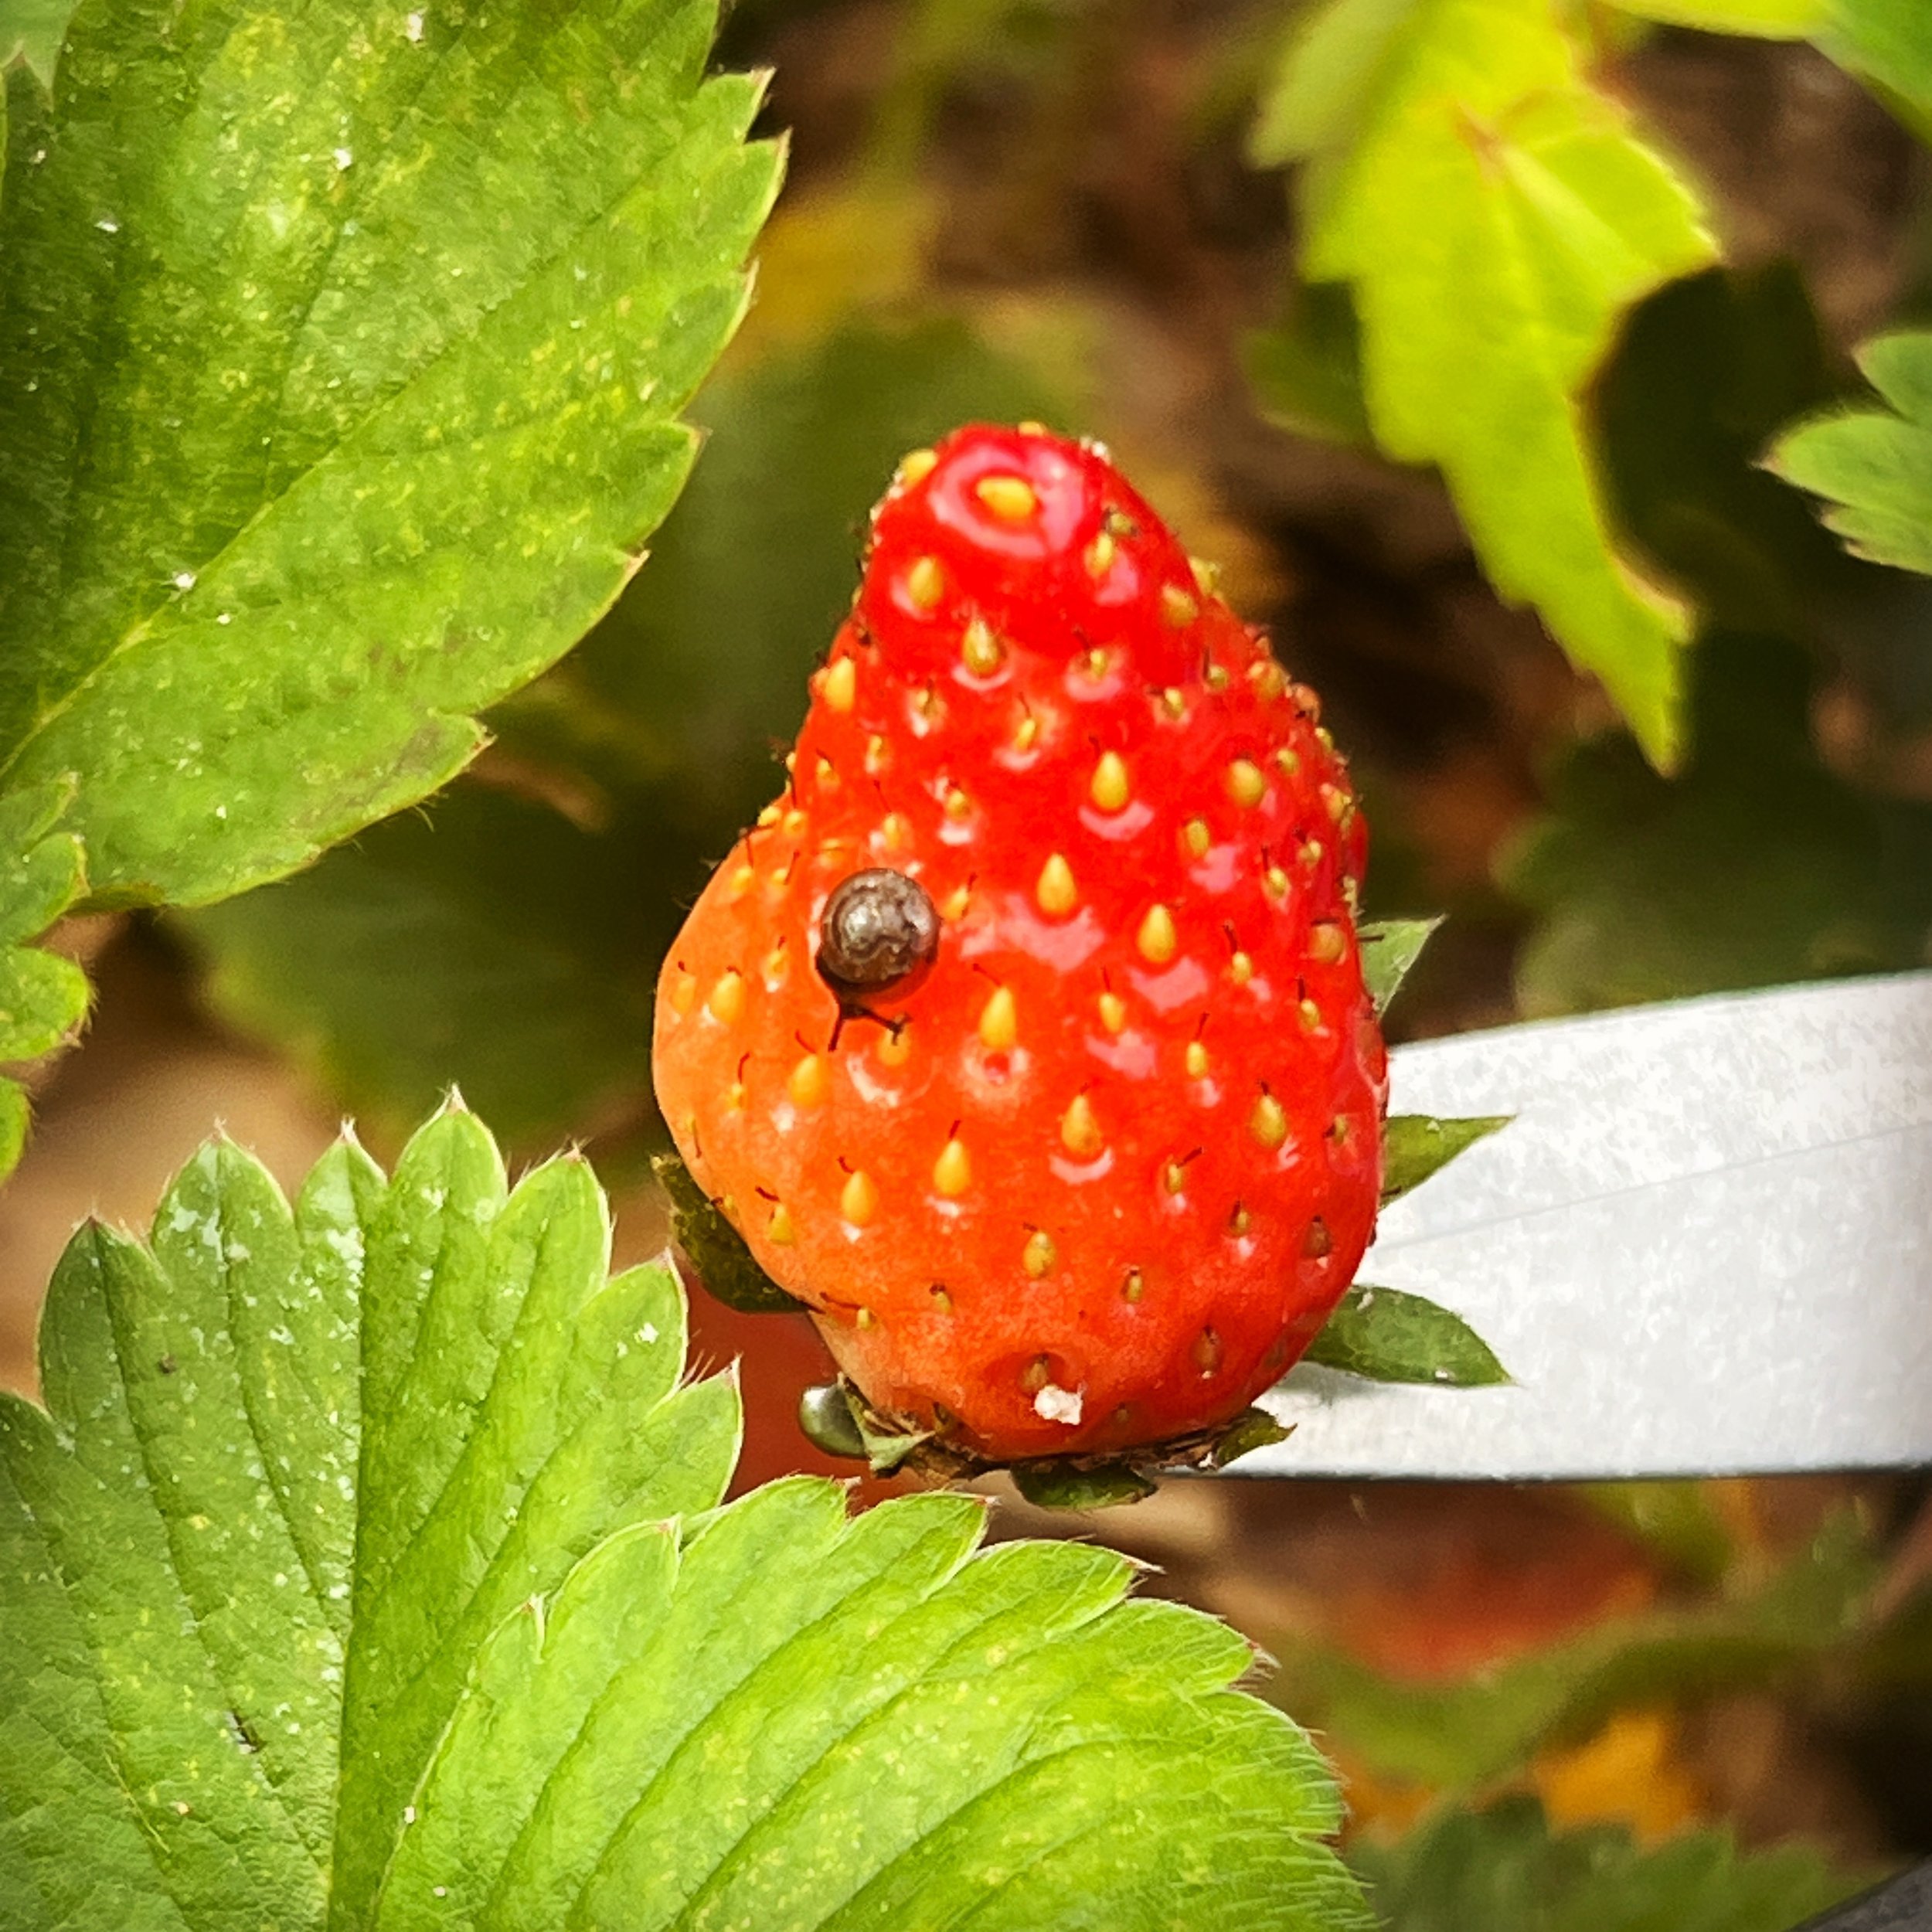 This wee lad was having a snack, so I let him keep the whole strawberry. I&rsquo;ve never seen such a tiny snail! Nature is amazing. 🐌 🍓 
#homesteading #gardening #gardenlife #homesteadersofinstagram #littleacrehomestead